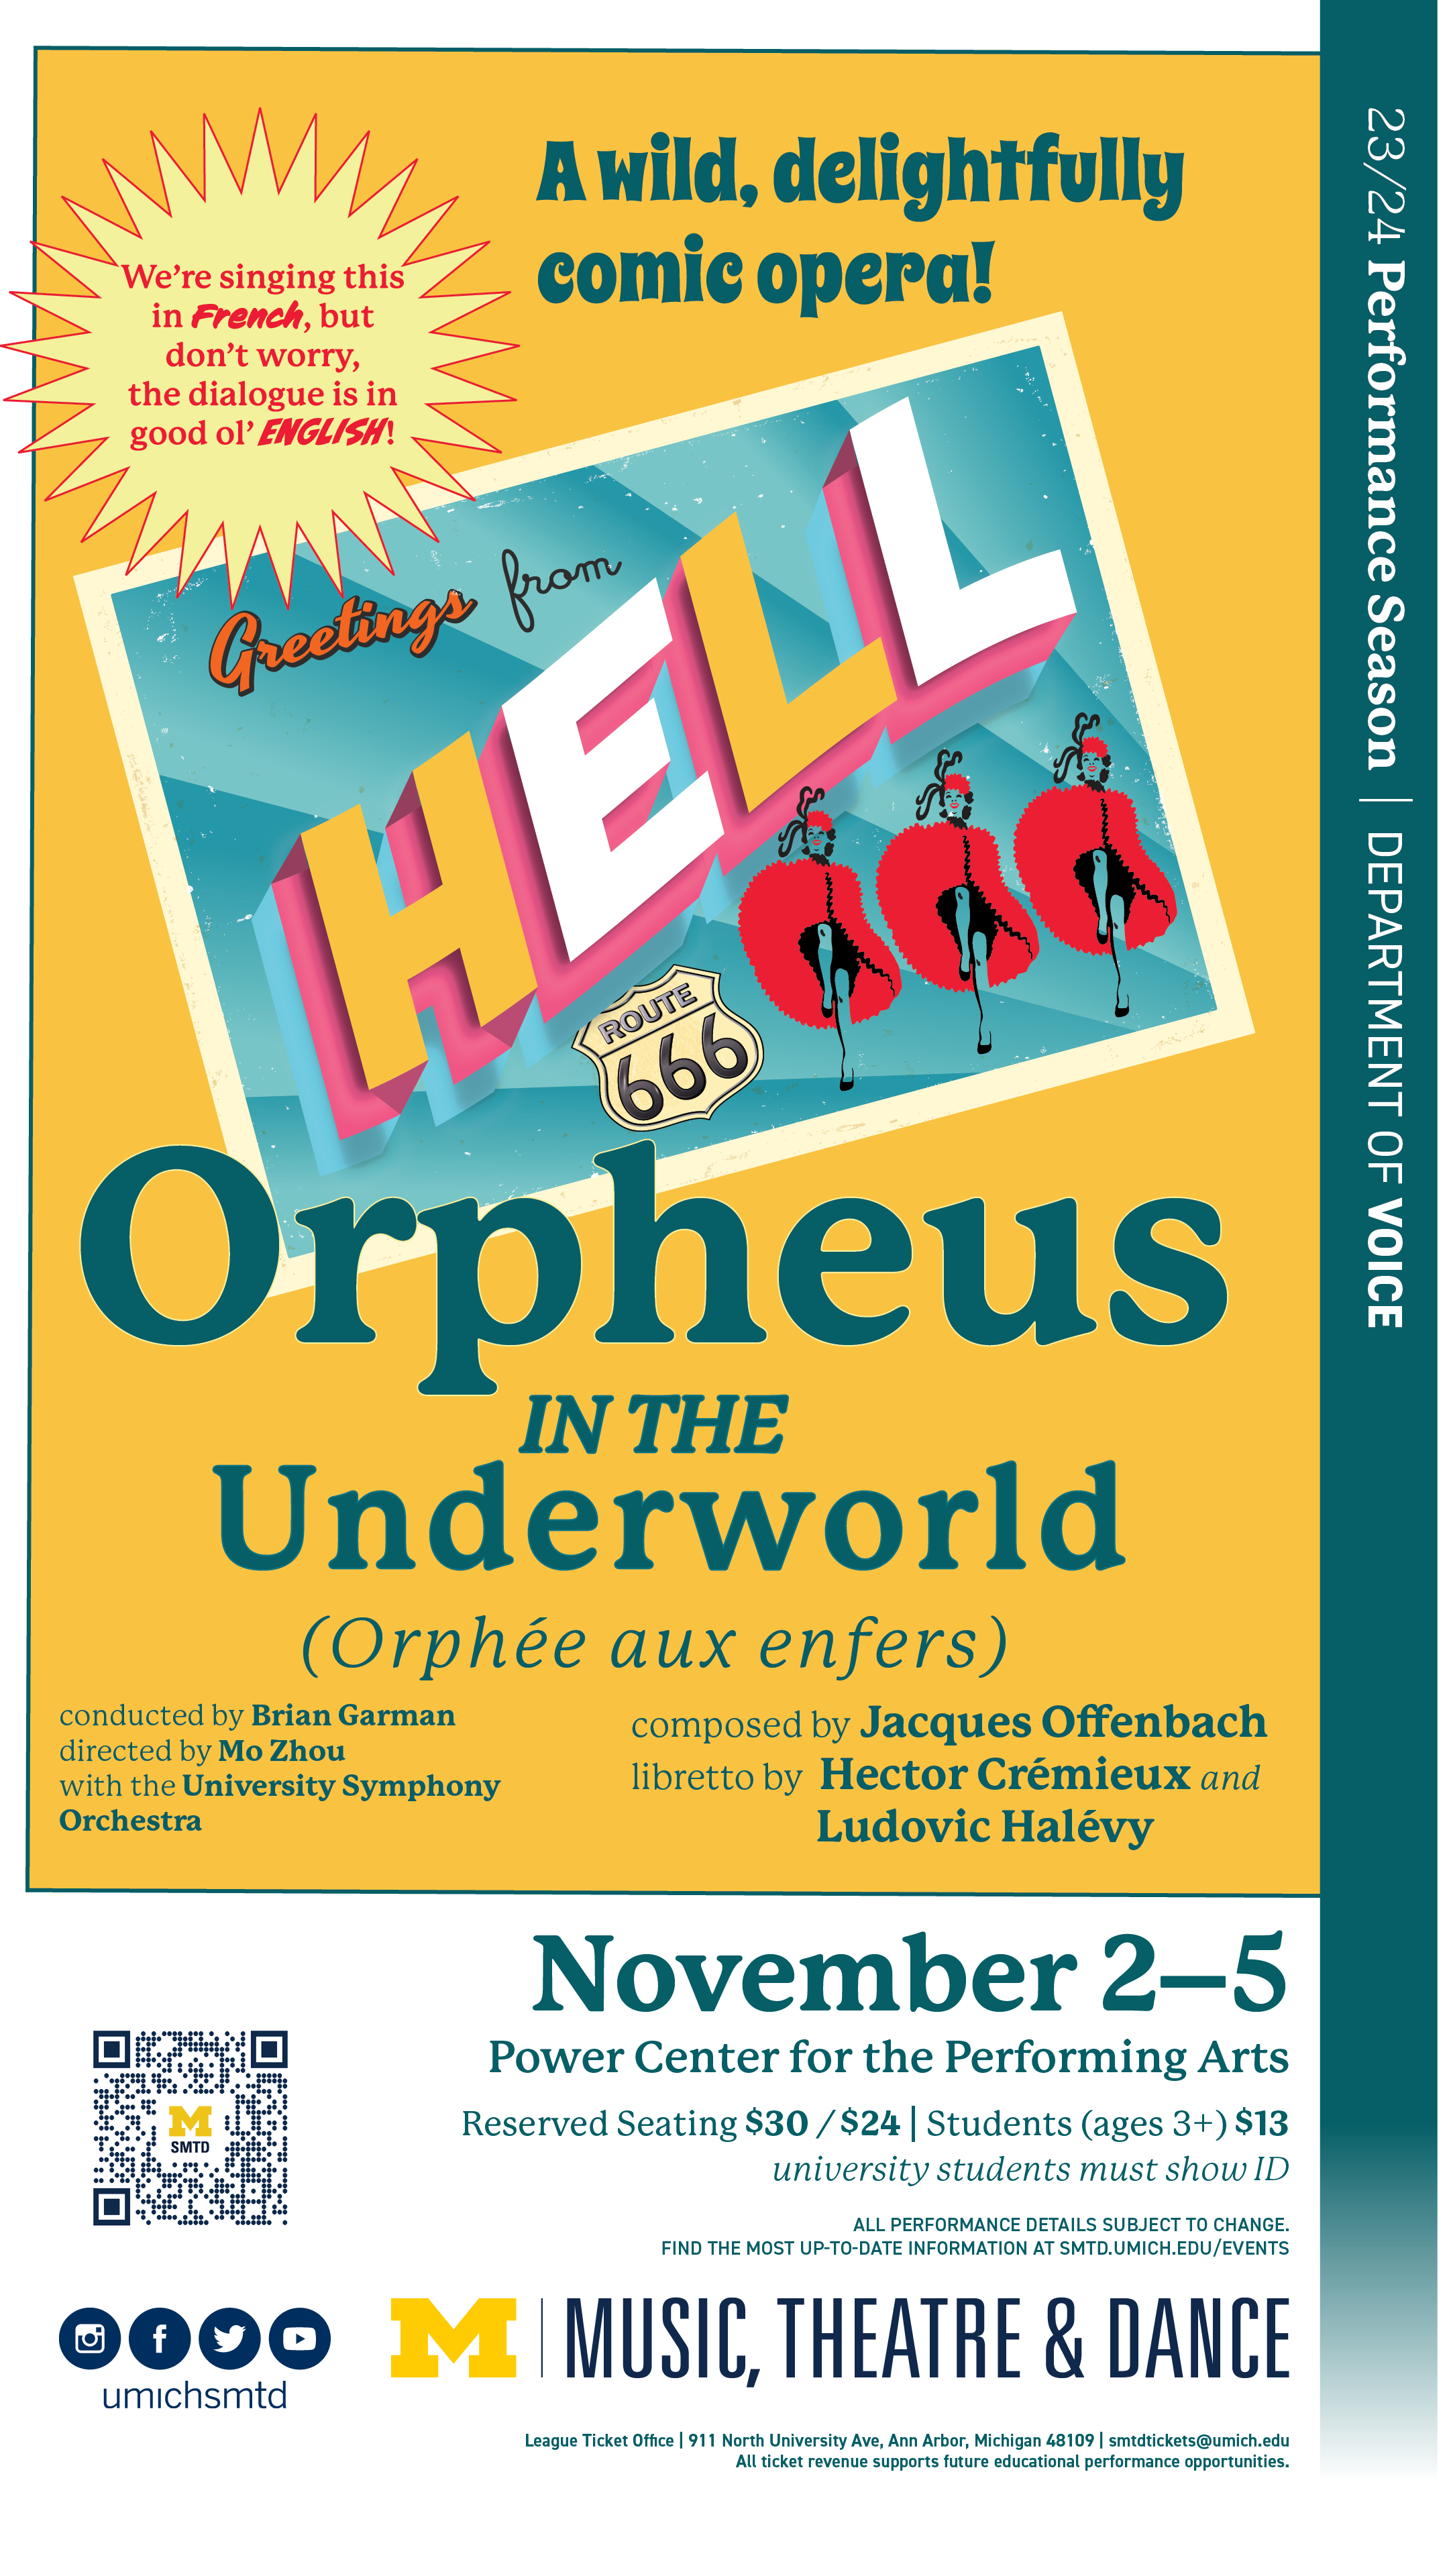 A vintage-style postcard that reads "Greetings from Hell" on a bright yellow background witht the text Orpheus in the Underworld and performance details.